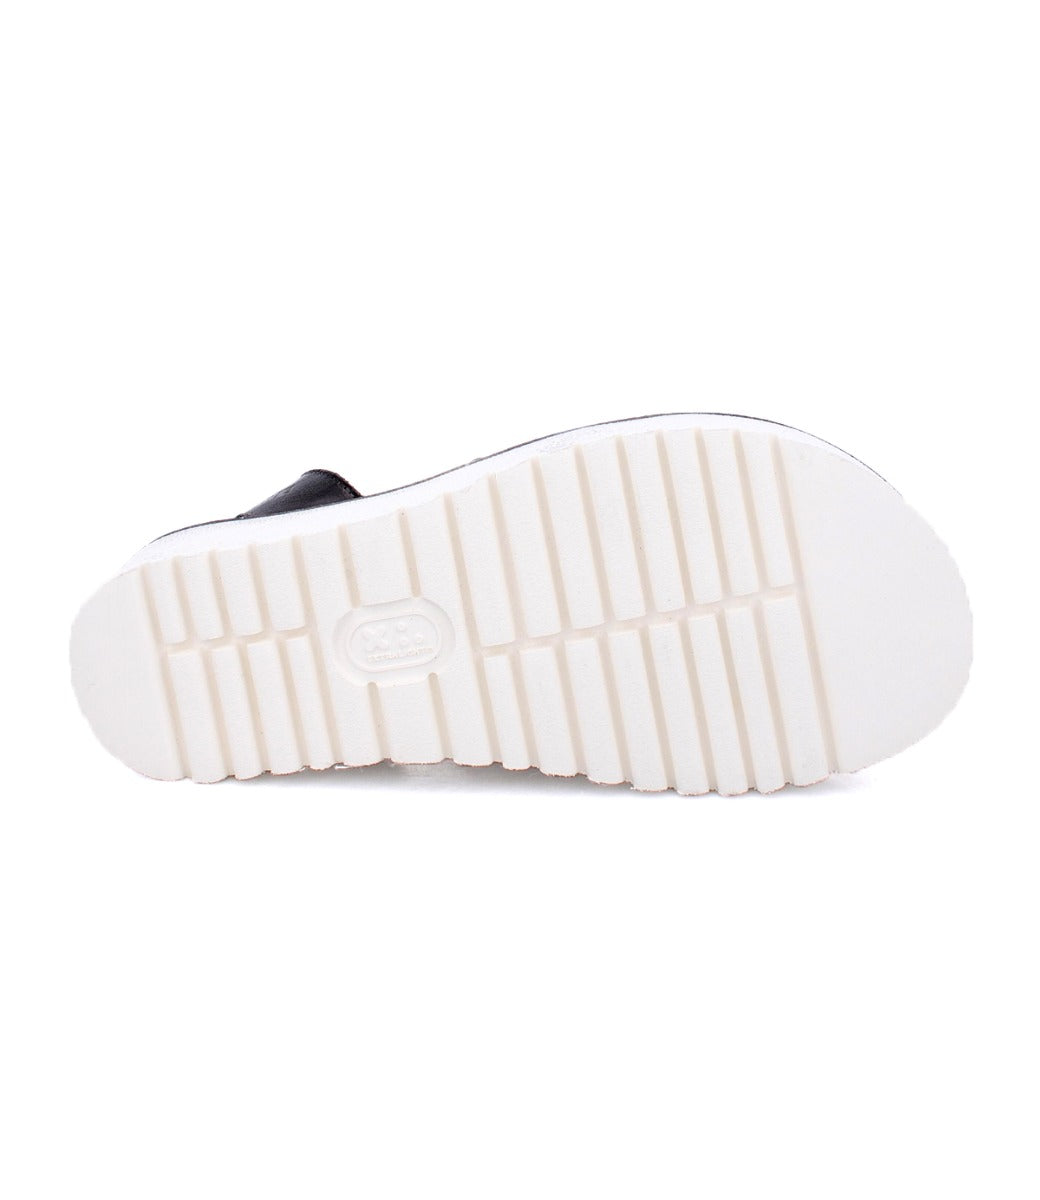 White sole of Clancy black leather sandals by Bed Stu.